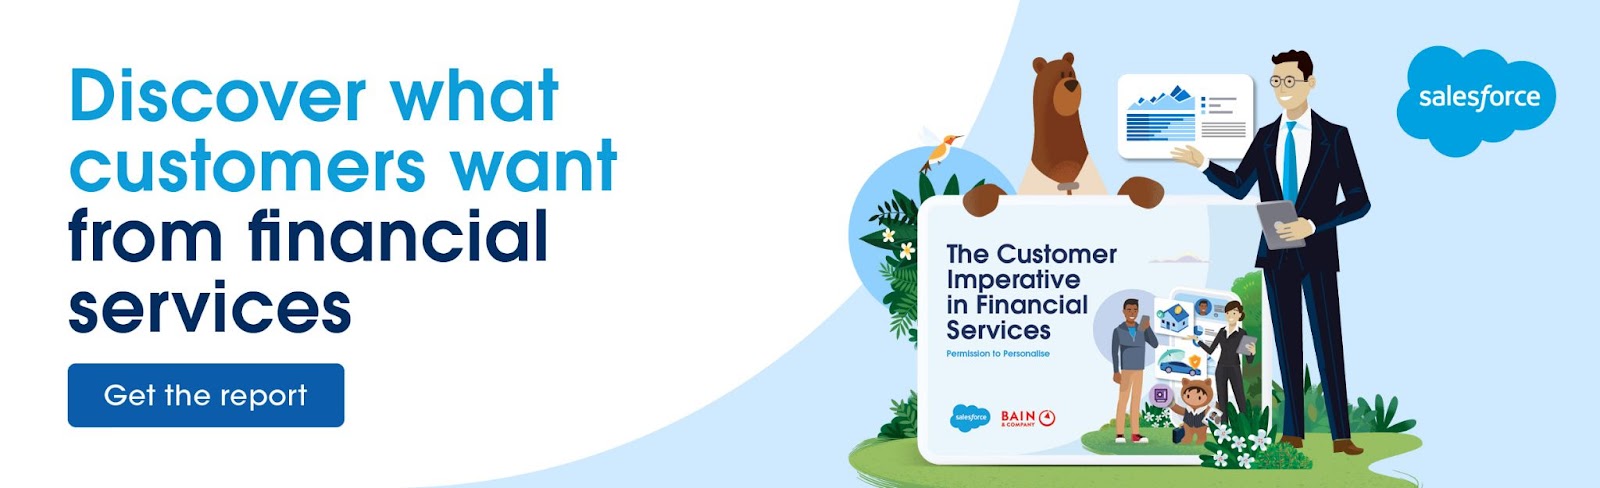 Discover what customers want from financial services - get the report